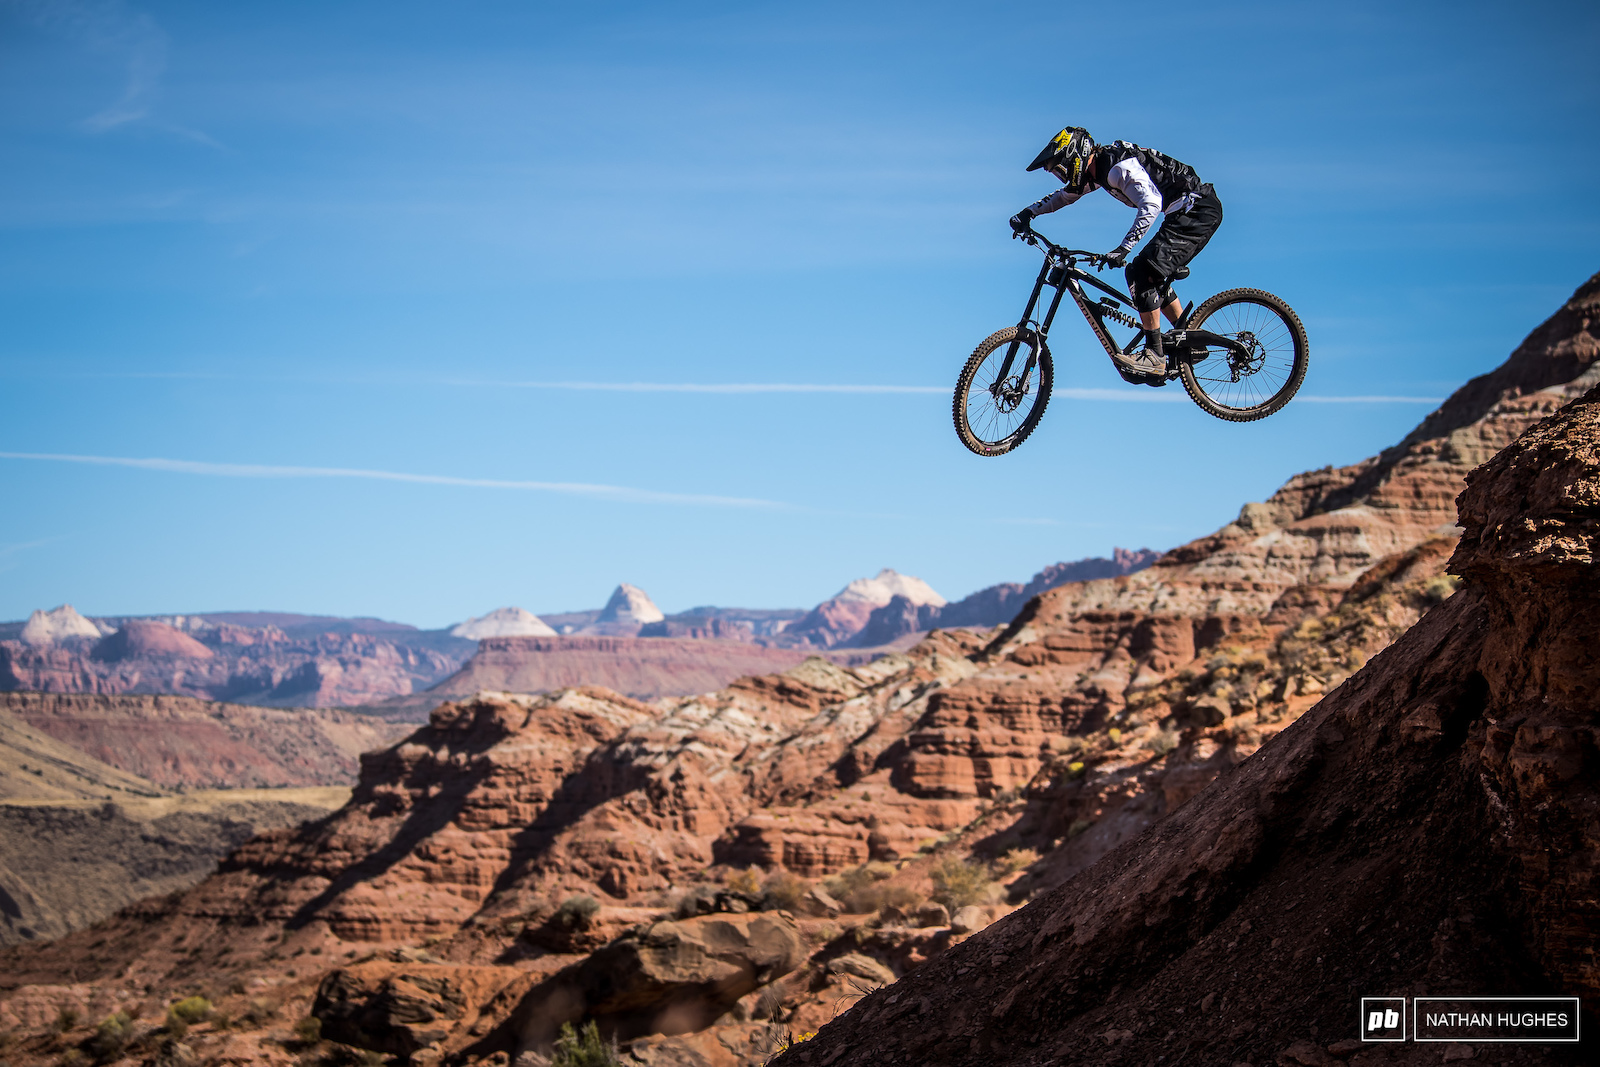 The most chilled rider on the hill Kurt Sorge was counter-intuitively one of the first riders to get wheels off the ground for Rampage 2019.